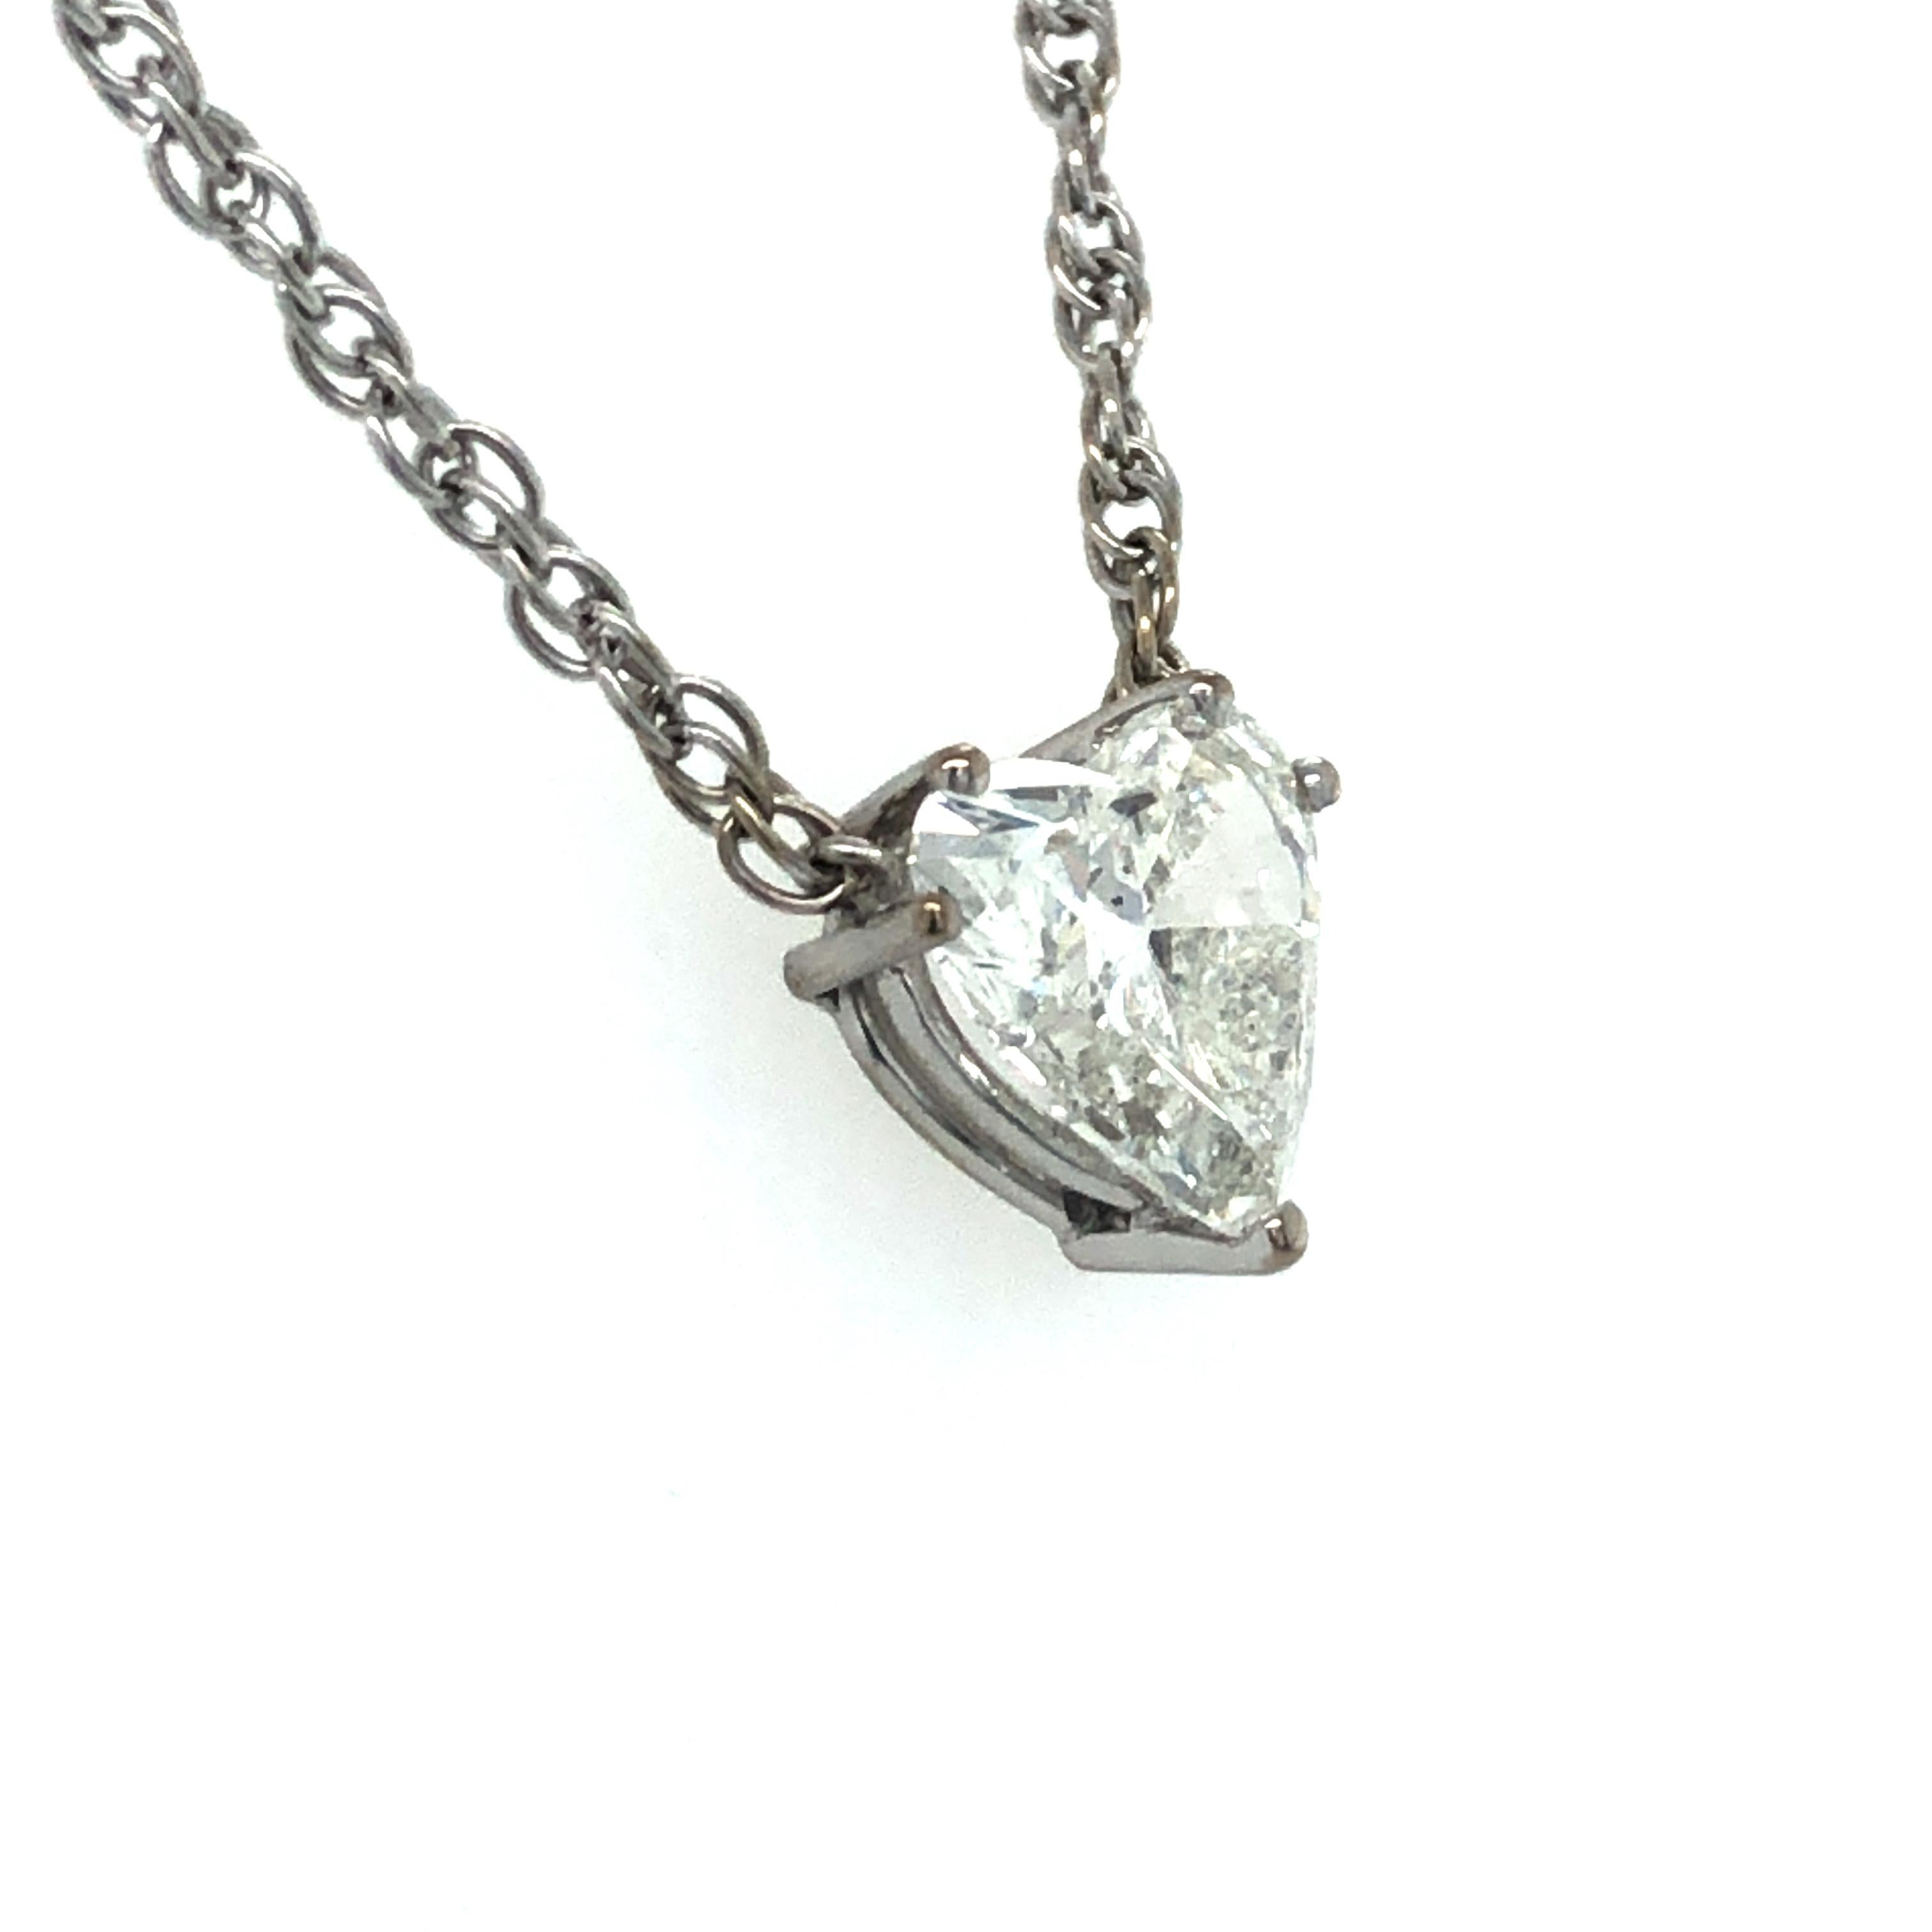 Contemporary GIA Certified 2.54 Carat Diamond Heart Necklace in 18 Karat White Gold